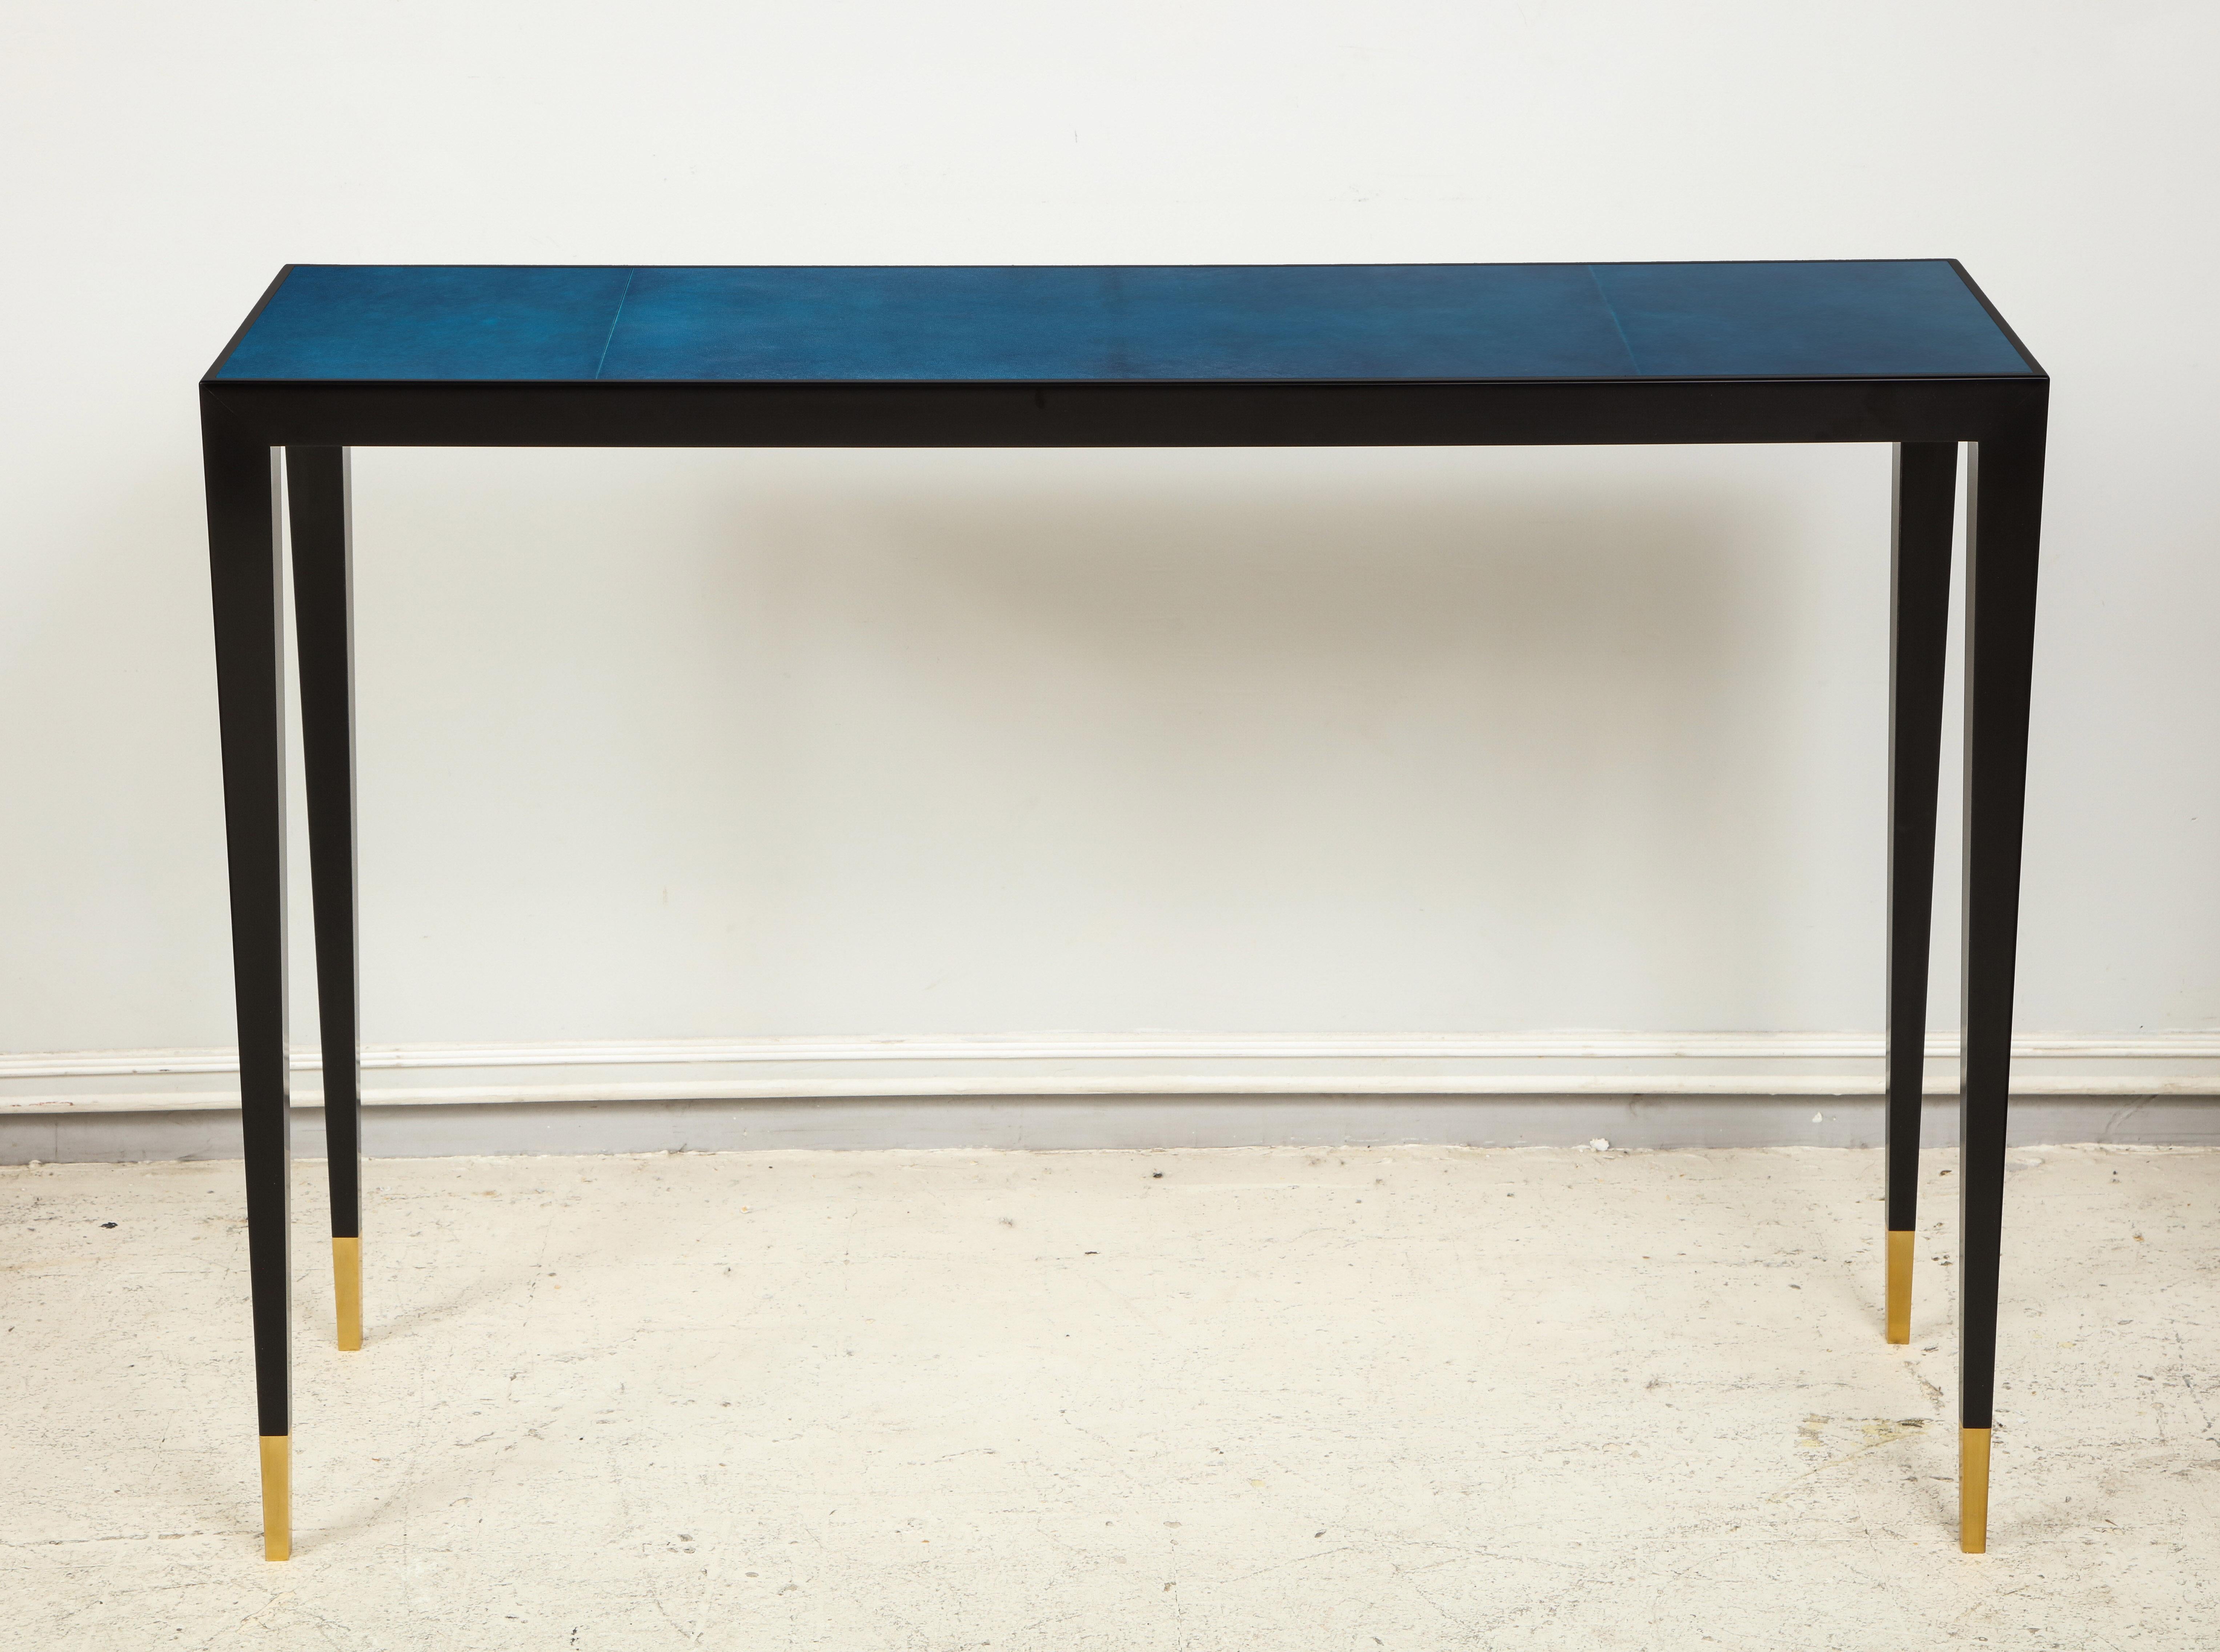 Custom ebonized console with blue parchment top in the Jean Michel Frank manner. It would take about 8 weeks to make this piece.